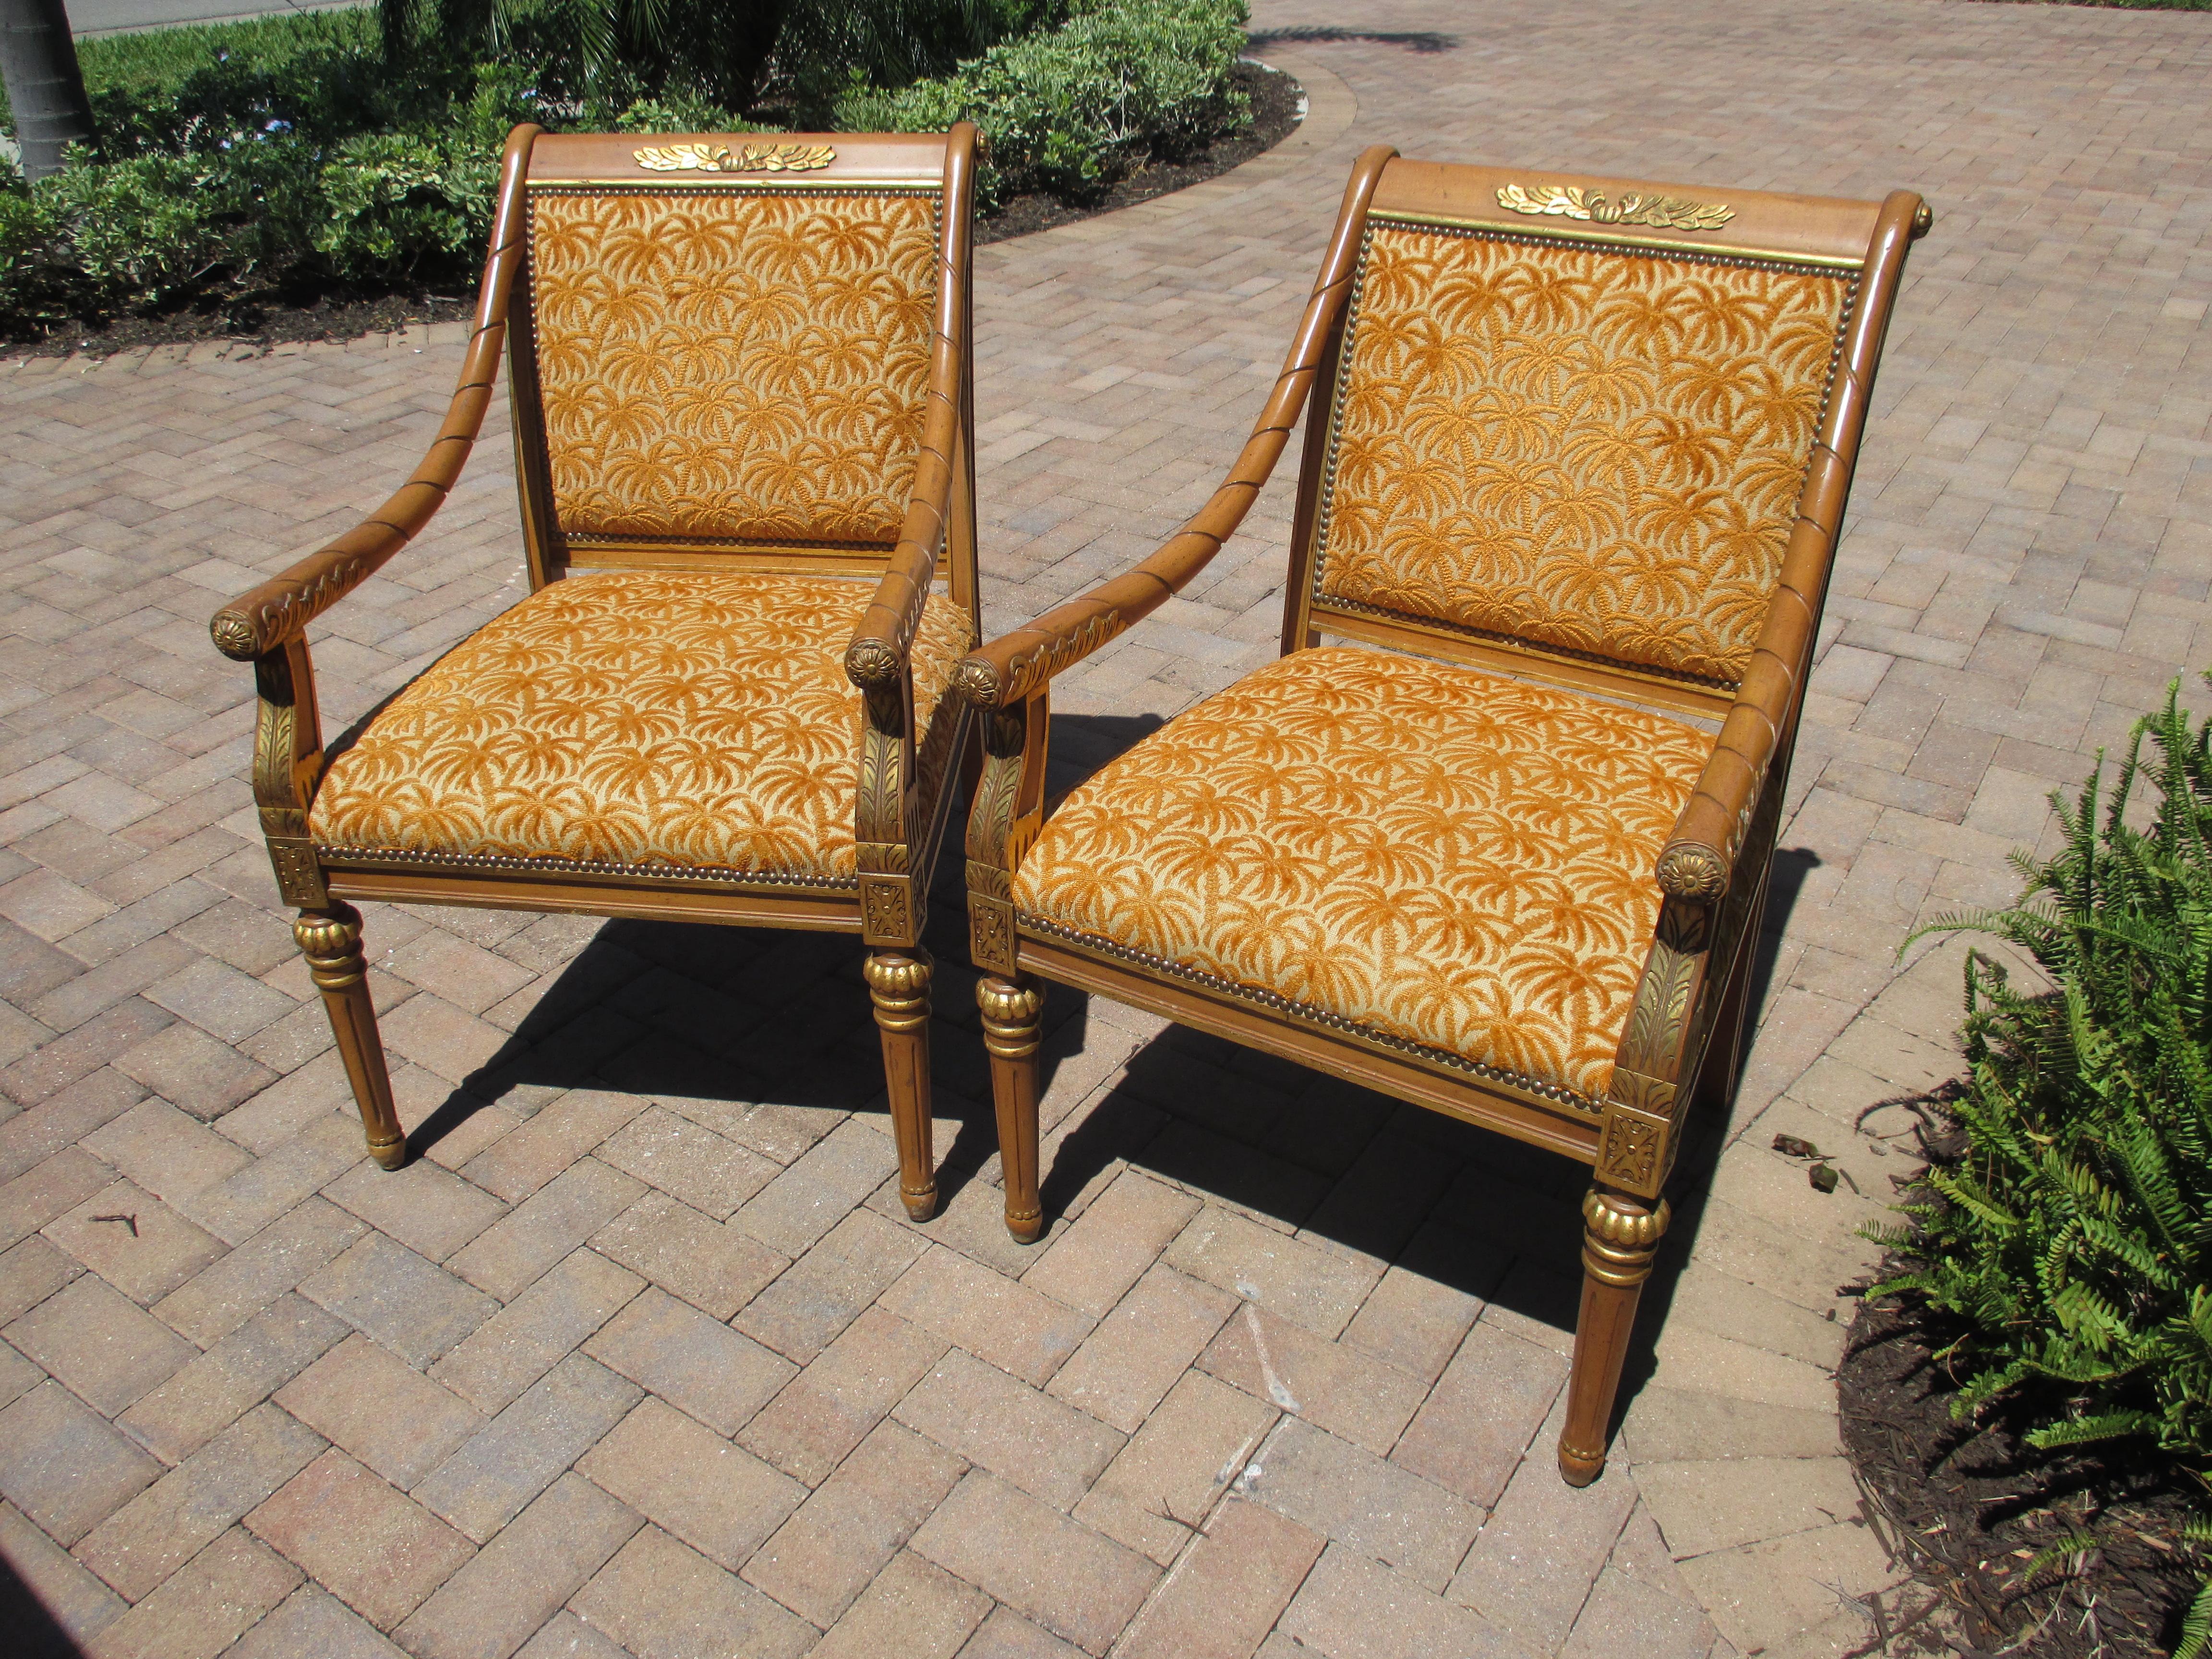 Gorgeous pair of honey stained Isenhour chairs with gilded accents, carvings and nailhead trim. Chairs have original burnt orange palm tree upholstery in good condition. Chair measurements are listed, however, there is an additional measurement of